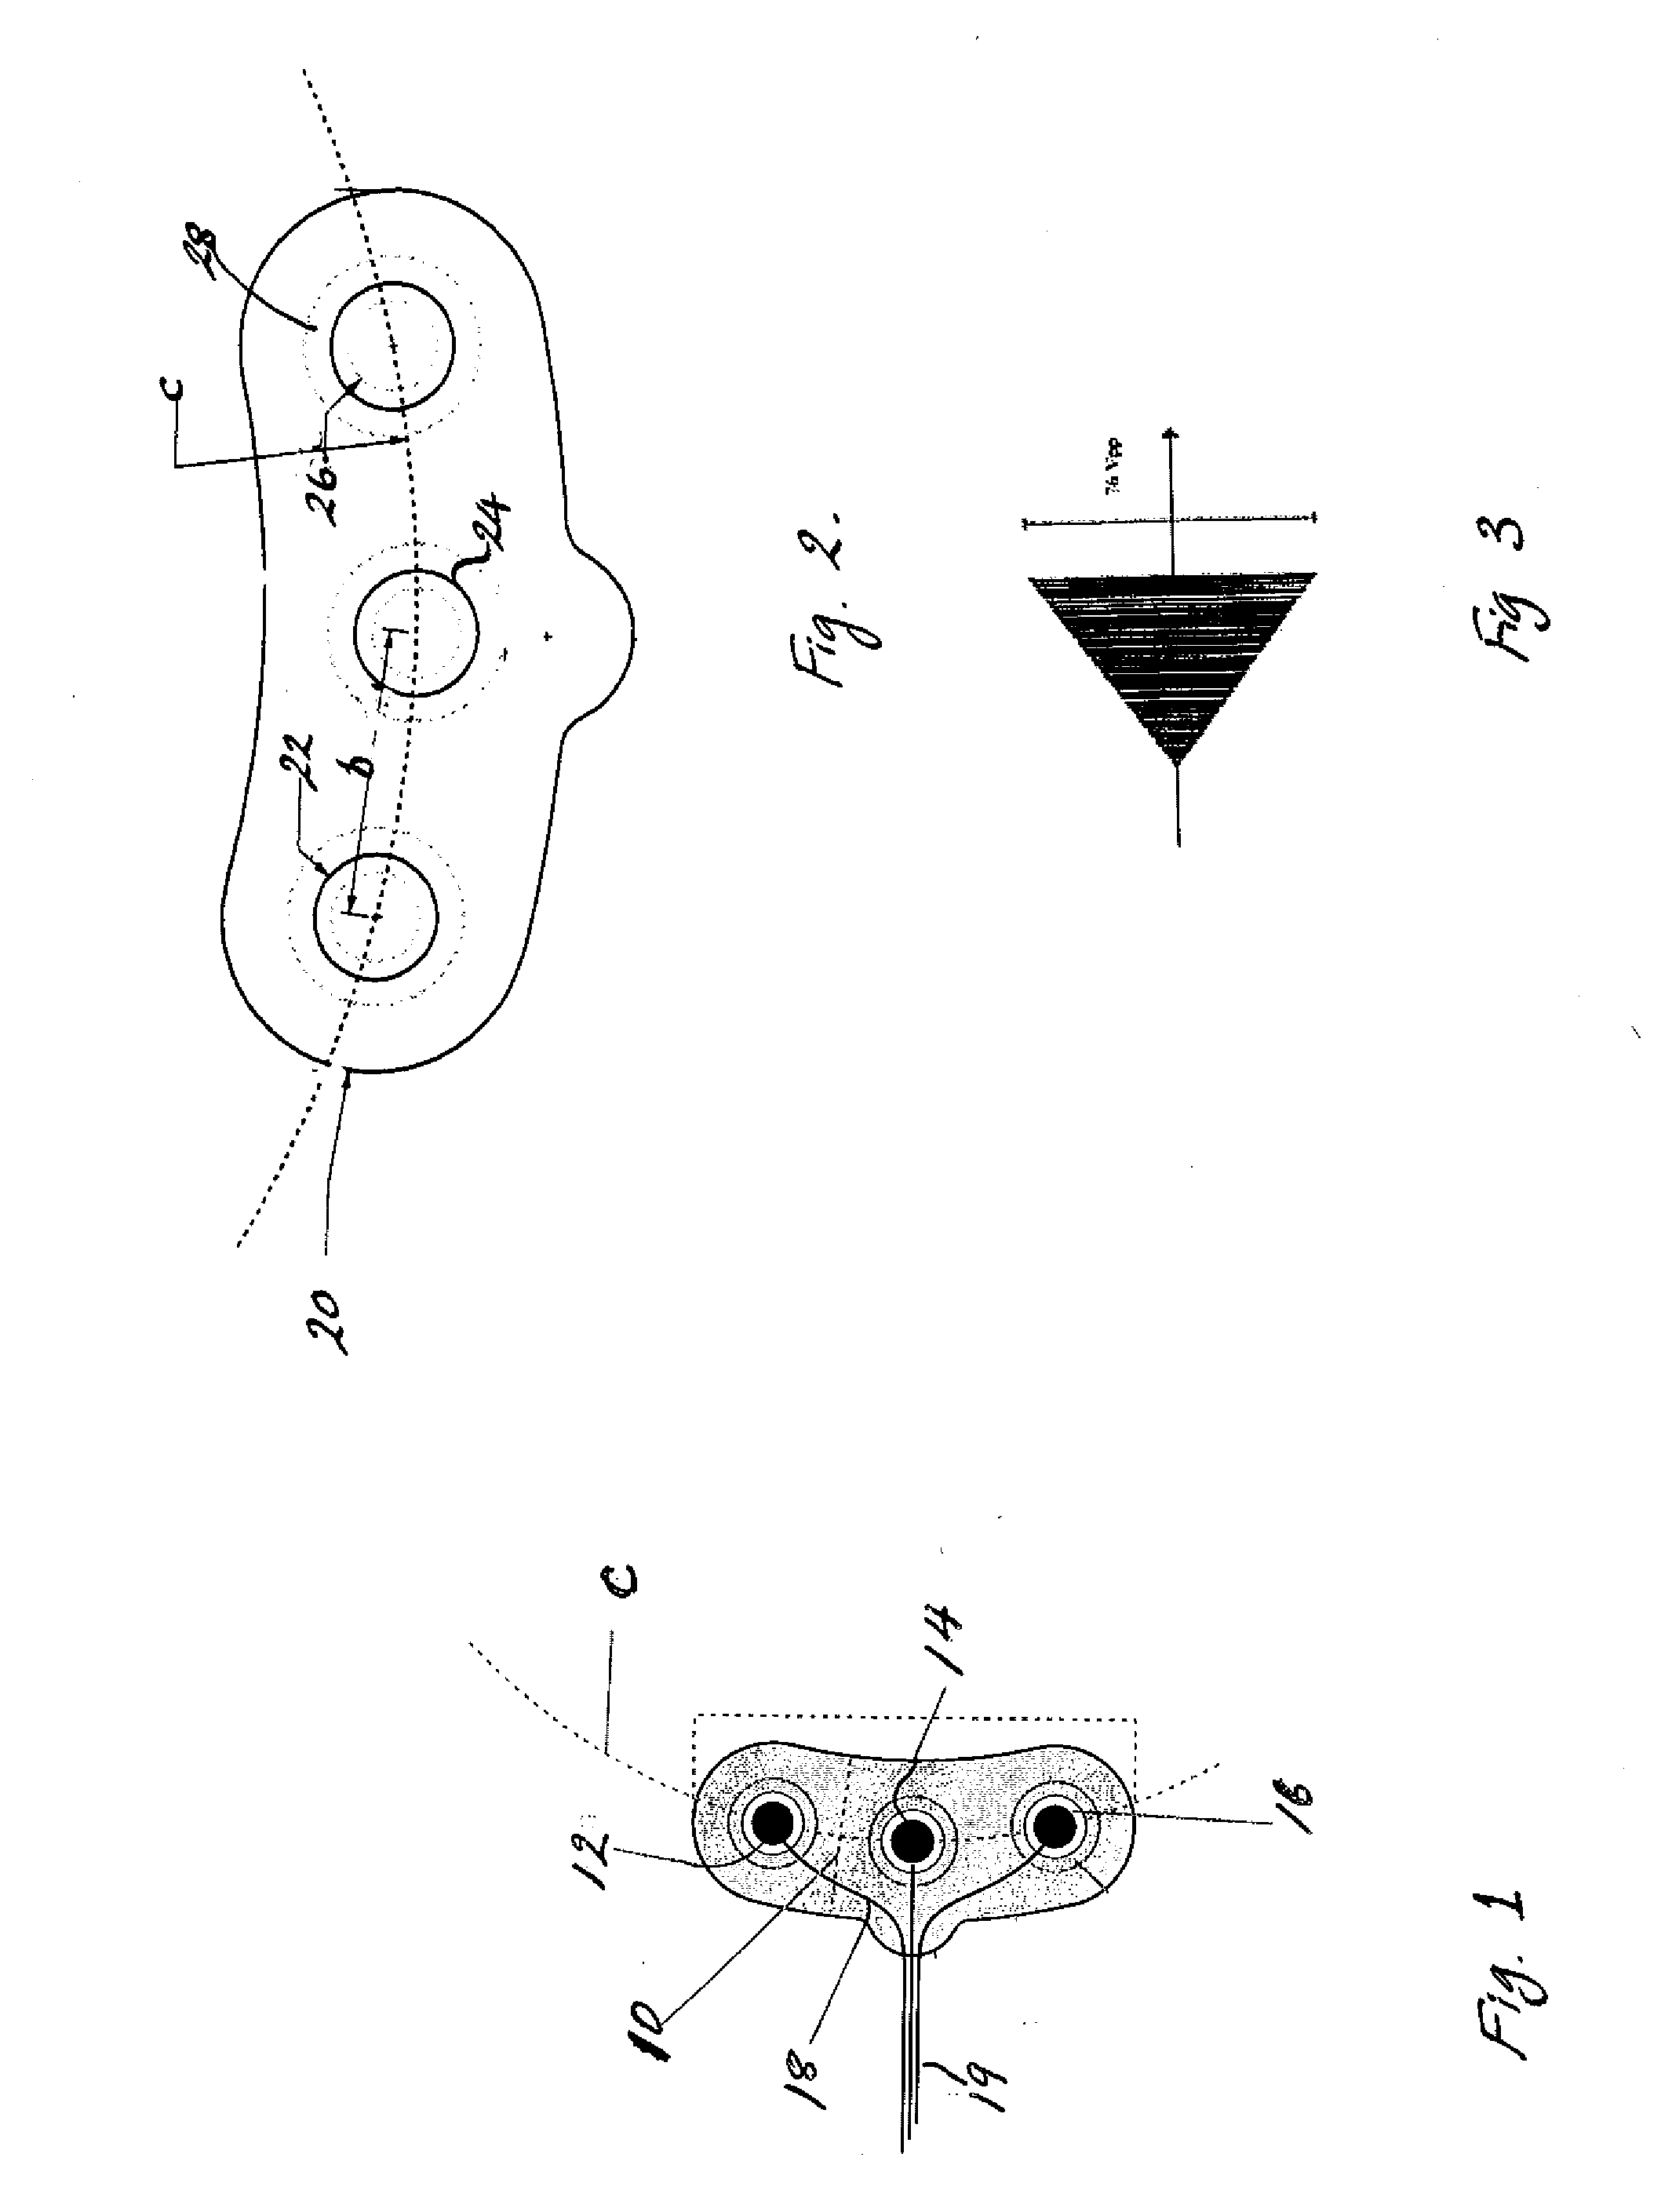 Electrode assemblies and bruxism monitoring apparatus